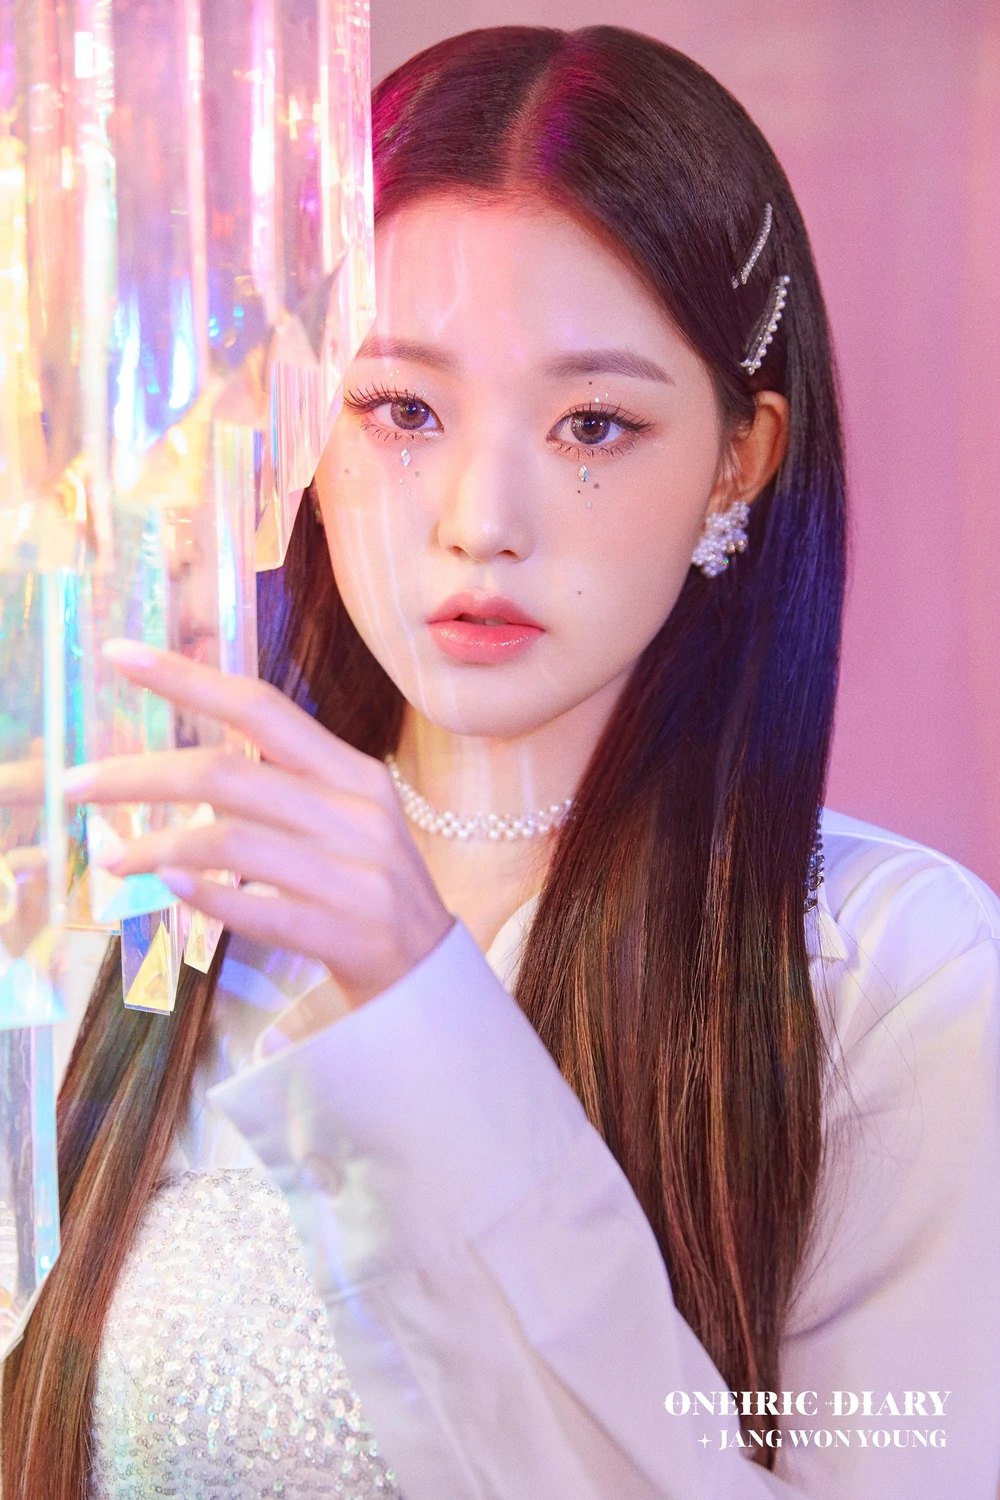 IZ*ONE Oneiric Diary Wonyoung Concept Teaser Picture Image Photo Kpop K-Concept 3